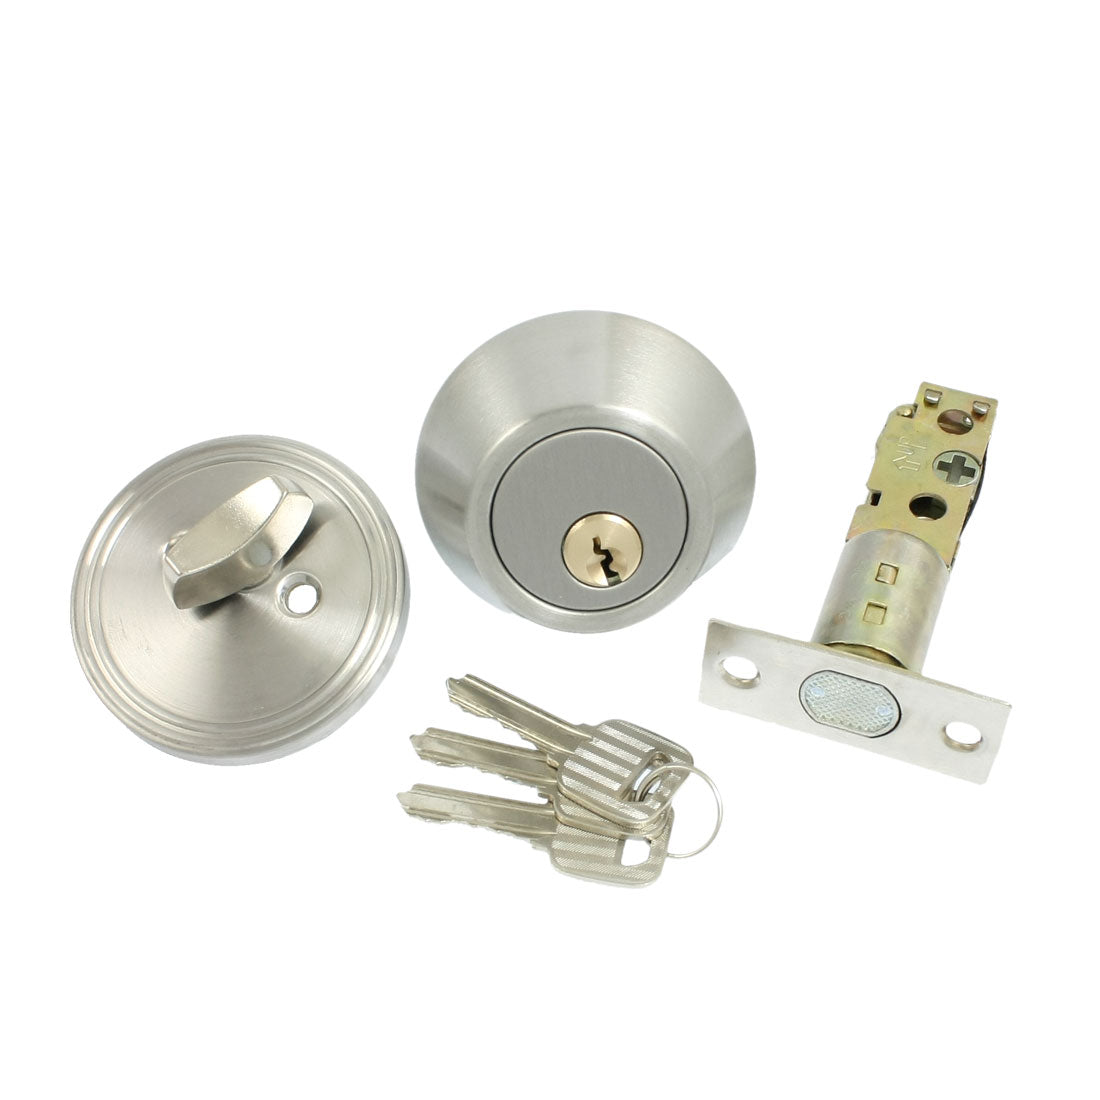 uxcell Uxcell Home Door Locking Security Single Cylinder Deadbolt Lock Silver Tone